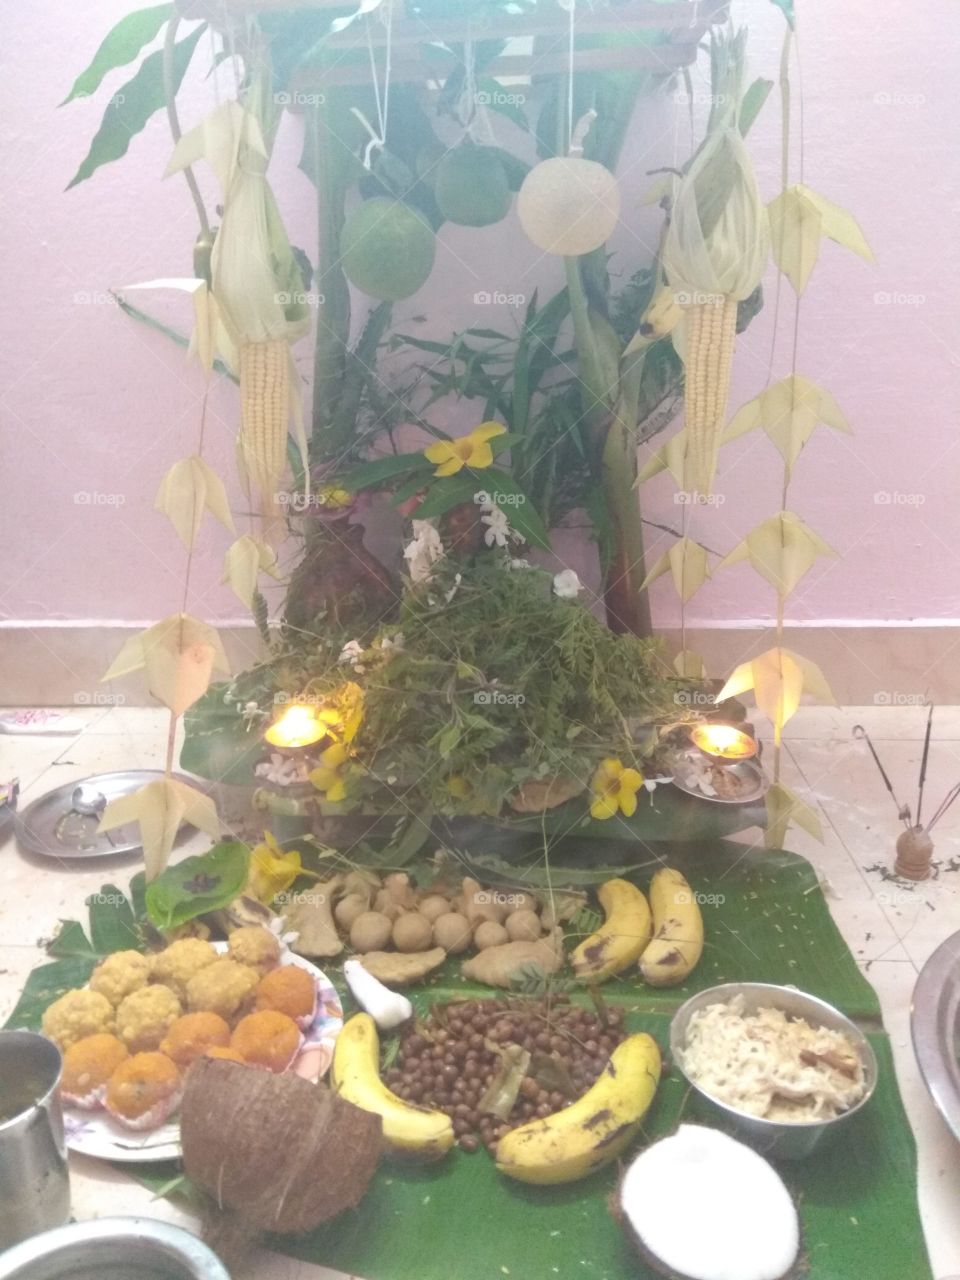 Lord Ganesh typical praying style on an auspicious day in India. they will decorate the small to very huge statues of Ganesh n pray by throwing the different types of leaves n fruits on it while reading his life storey. very interesting storey.